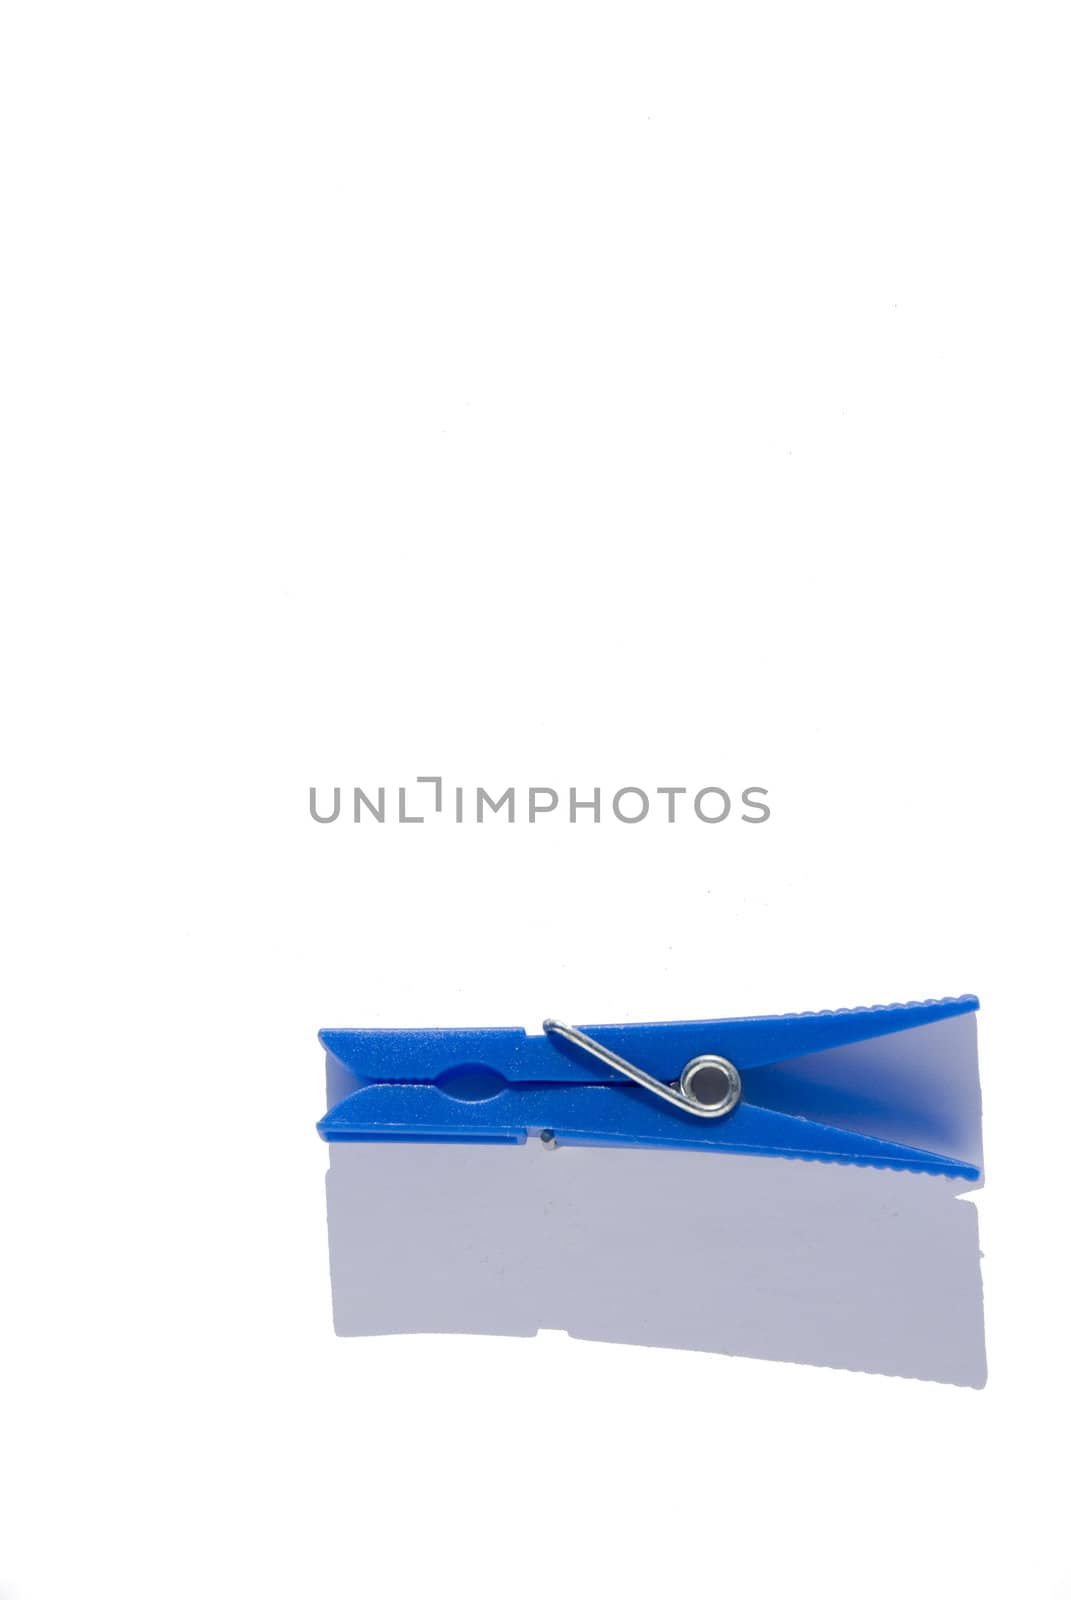 Blue clothes pin on a white background